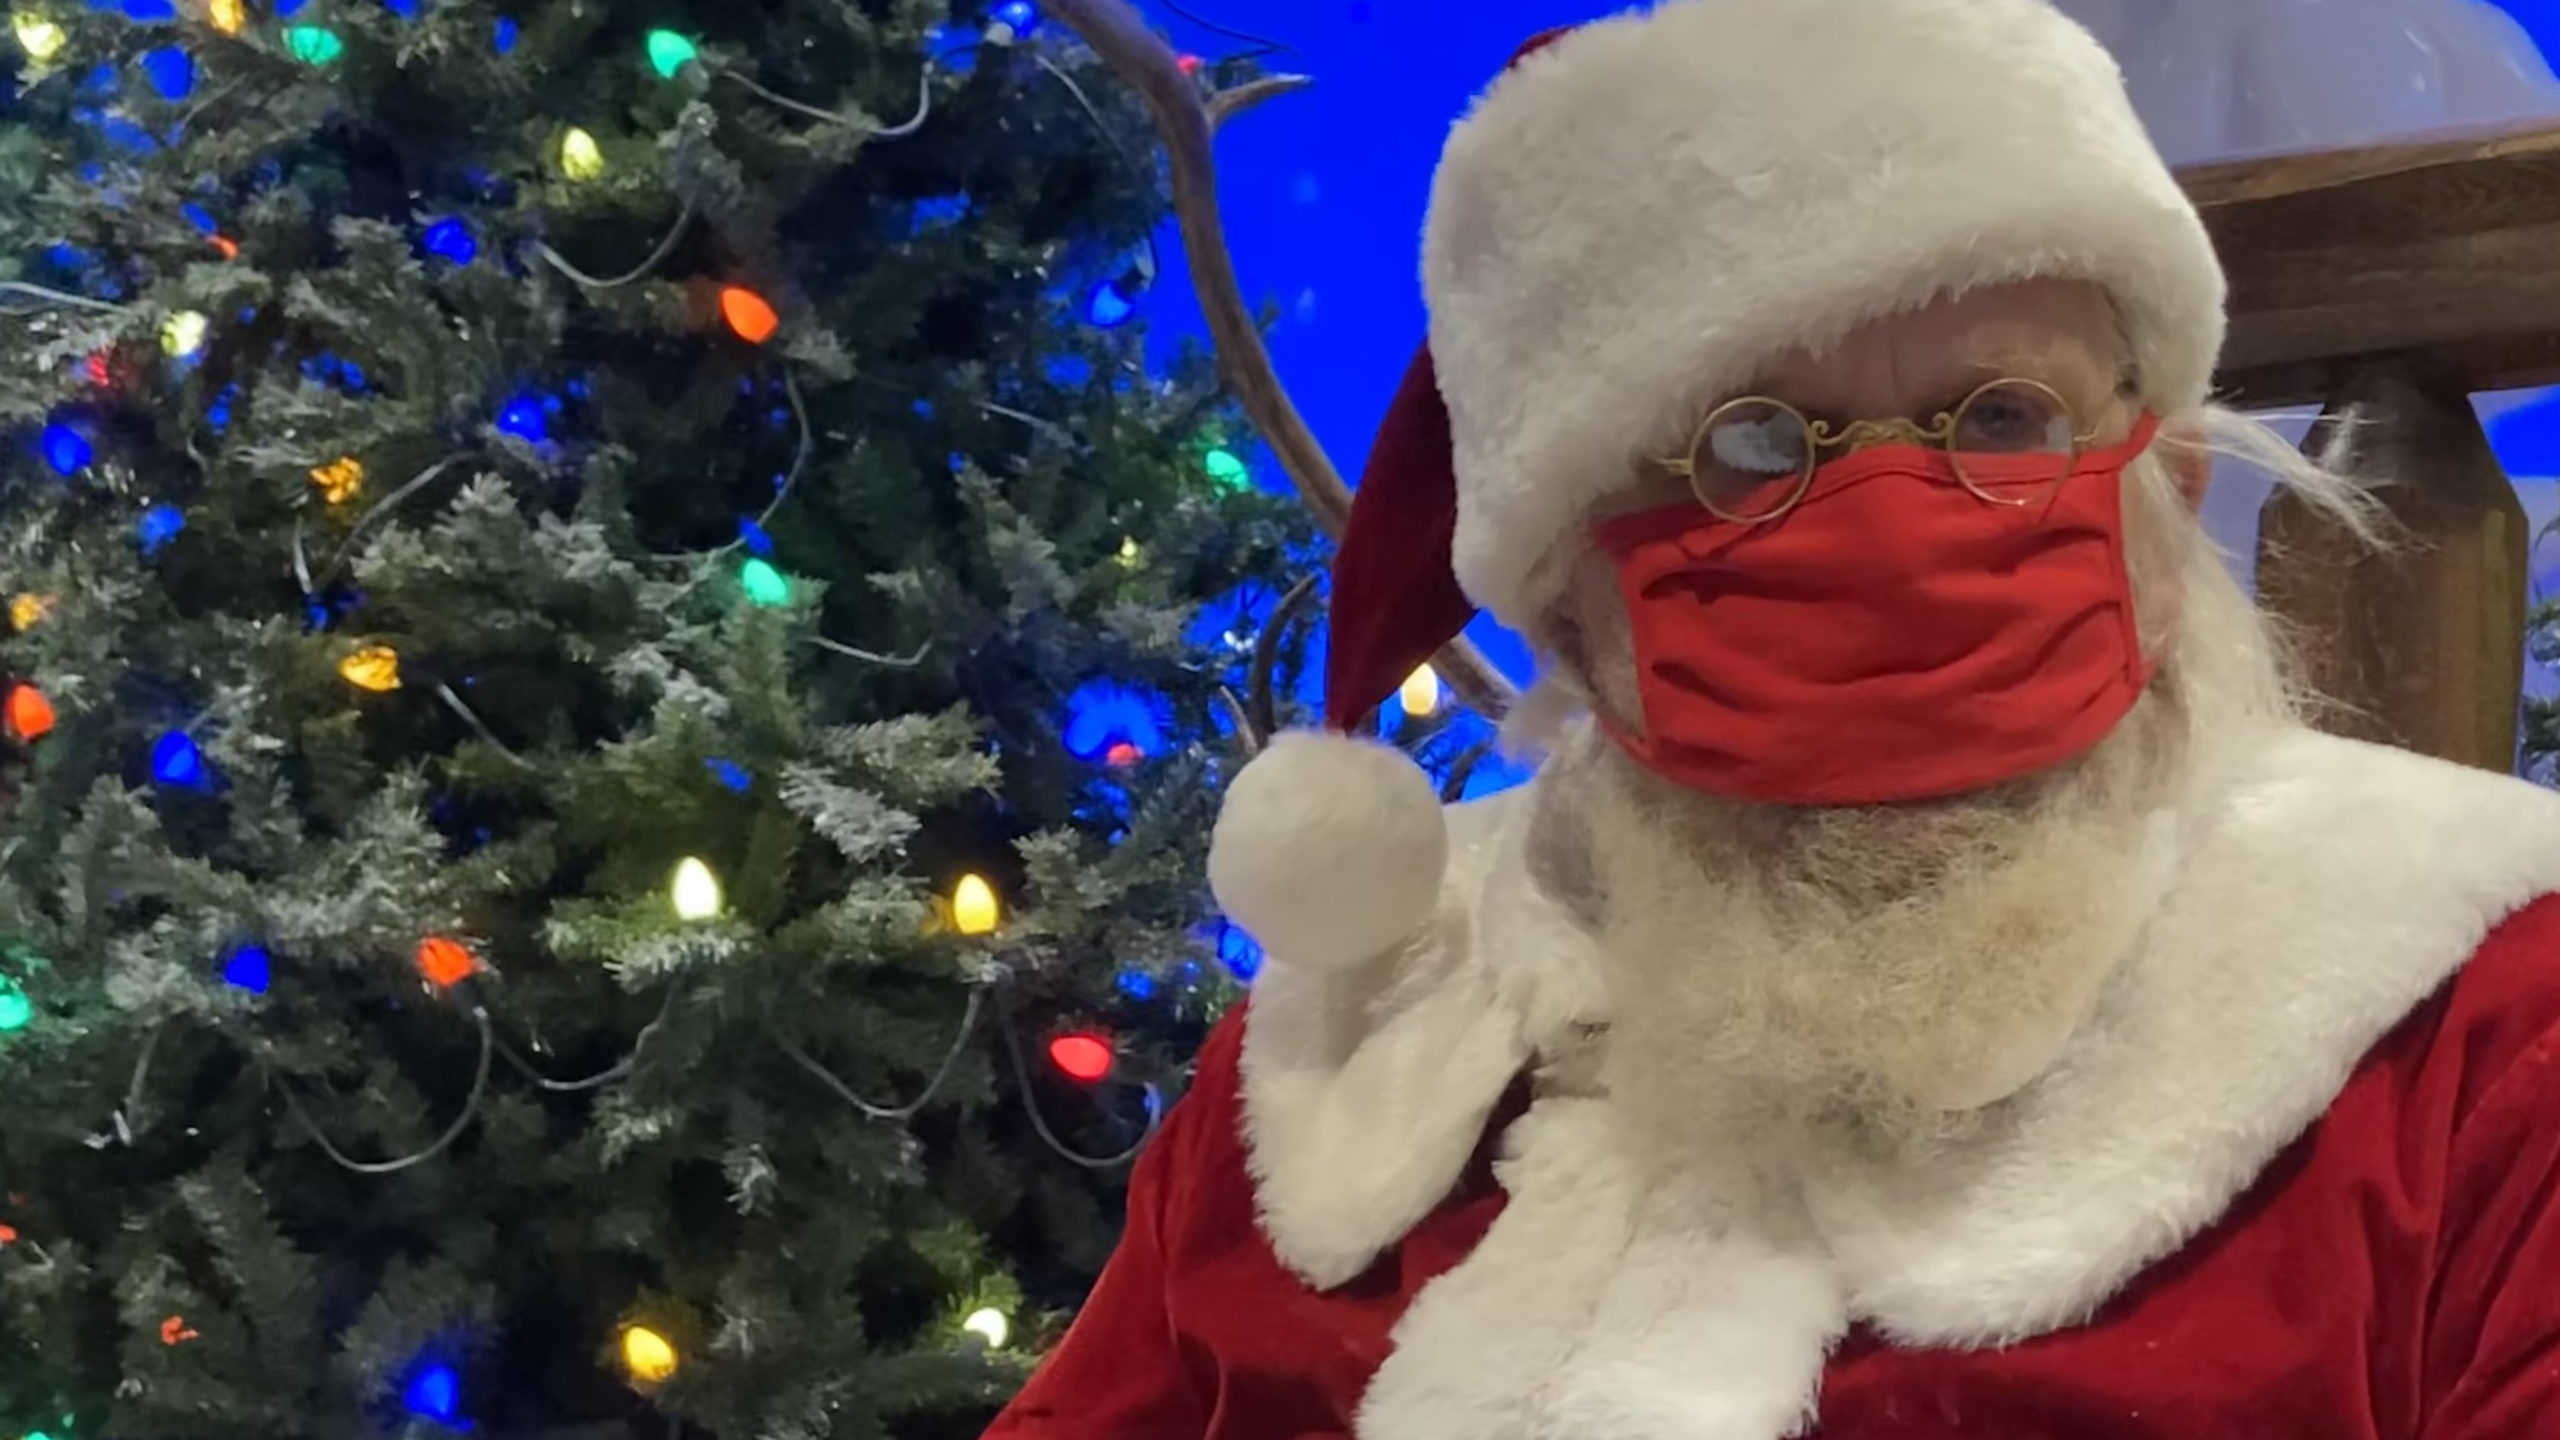 Floyd Blakeney, who has been Santa for 40 years, says this Christmas is definitely different.